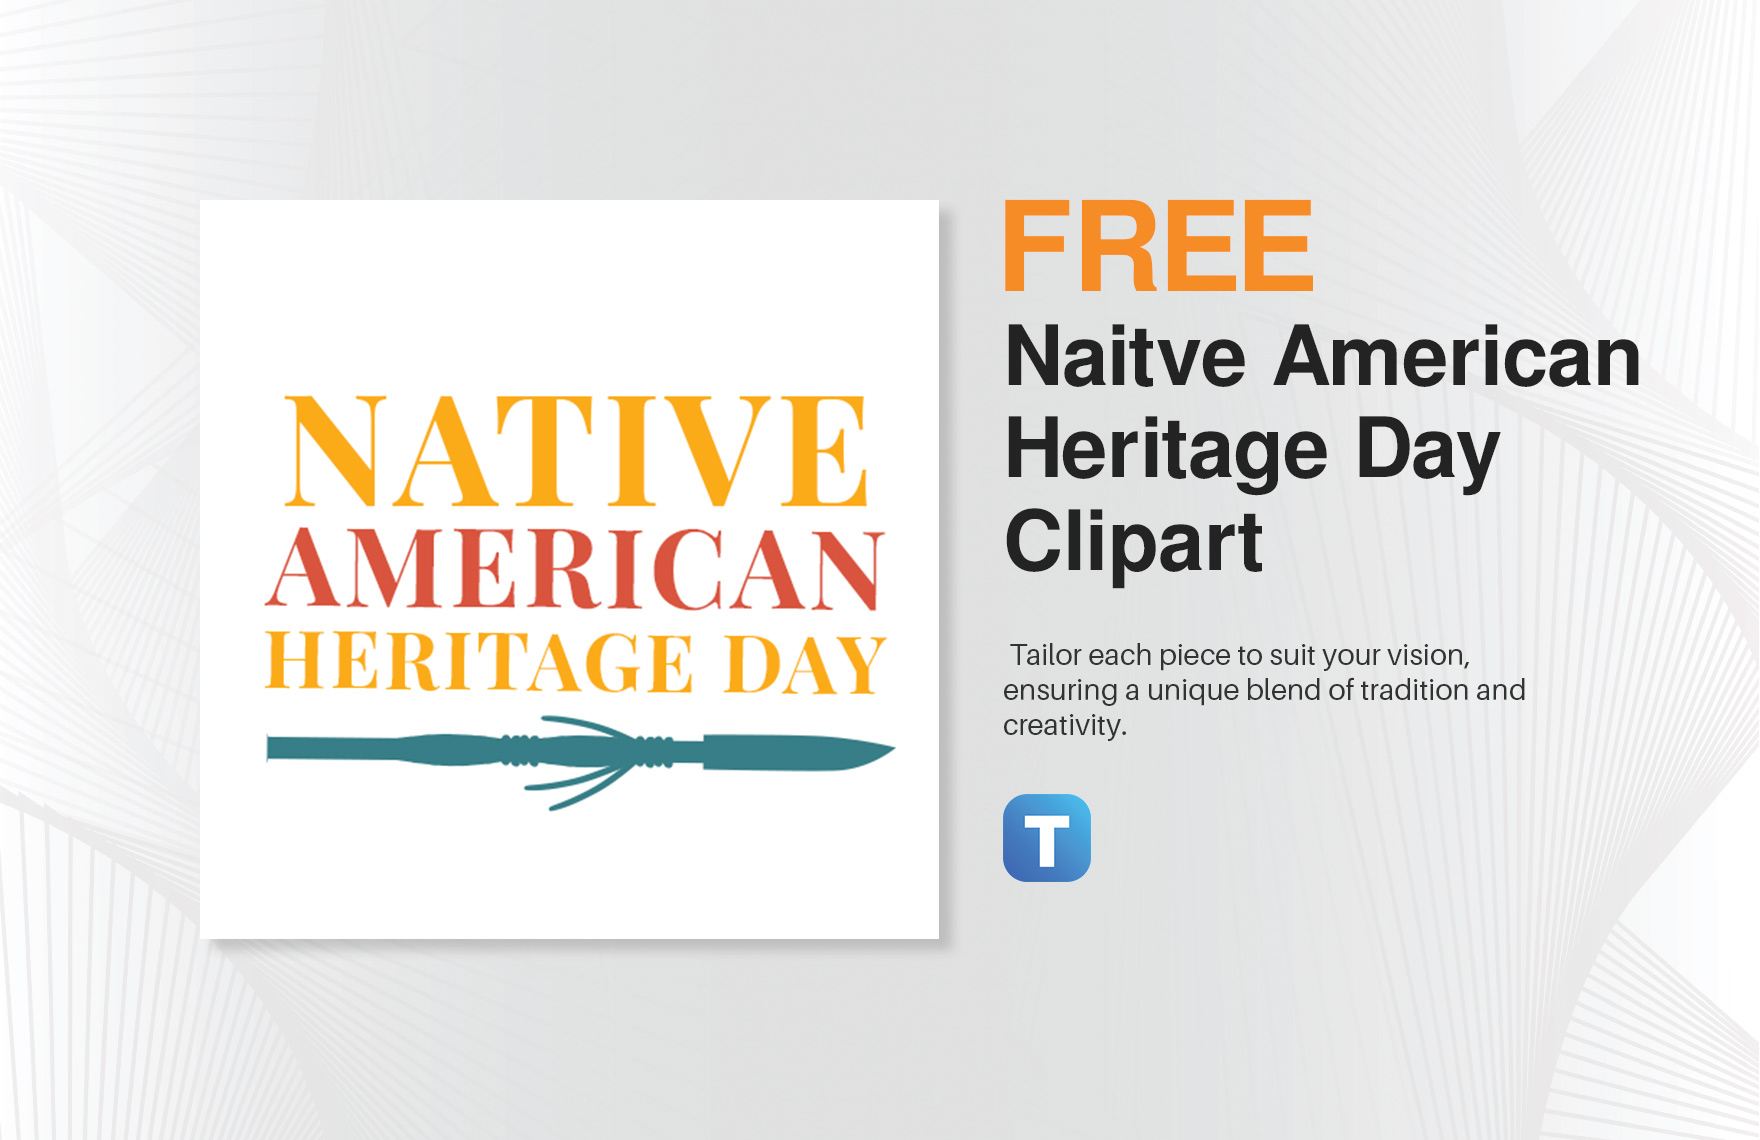 Naitve American Heritage Day Clipart